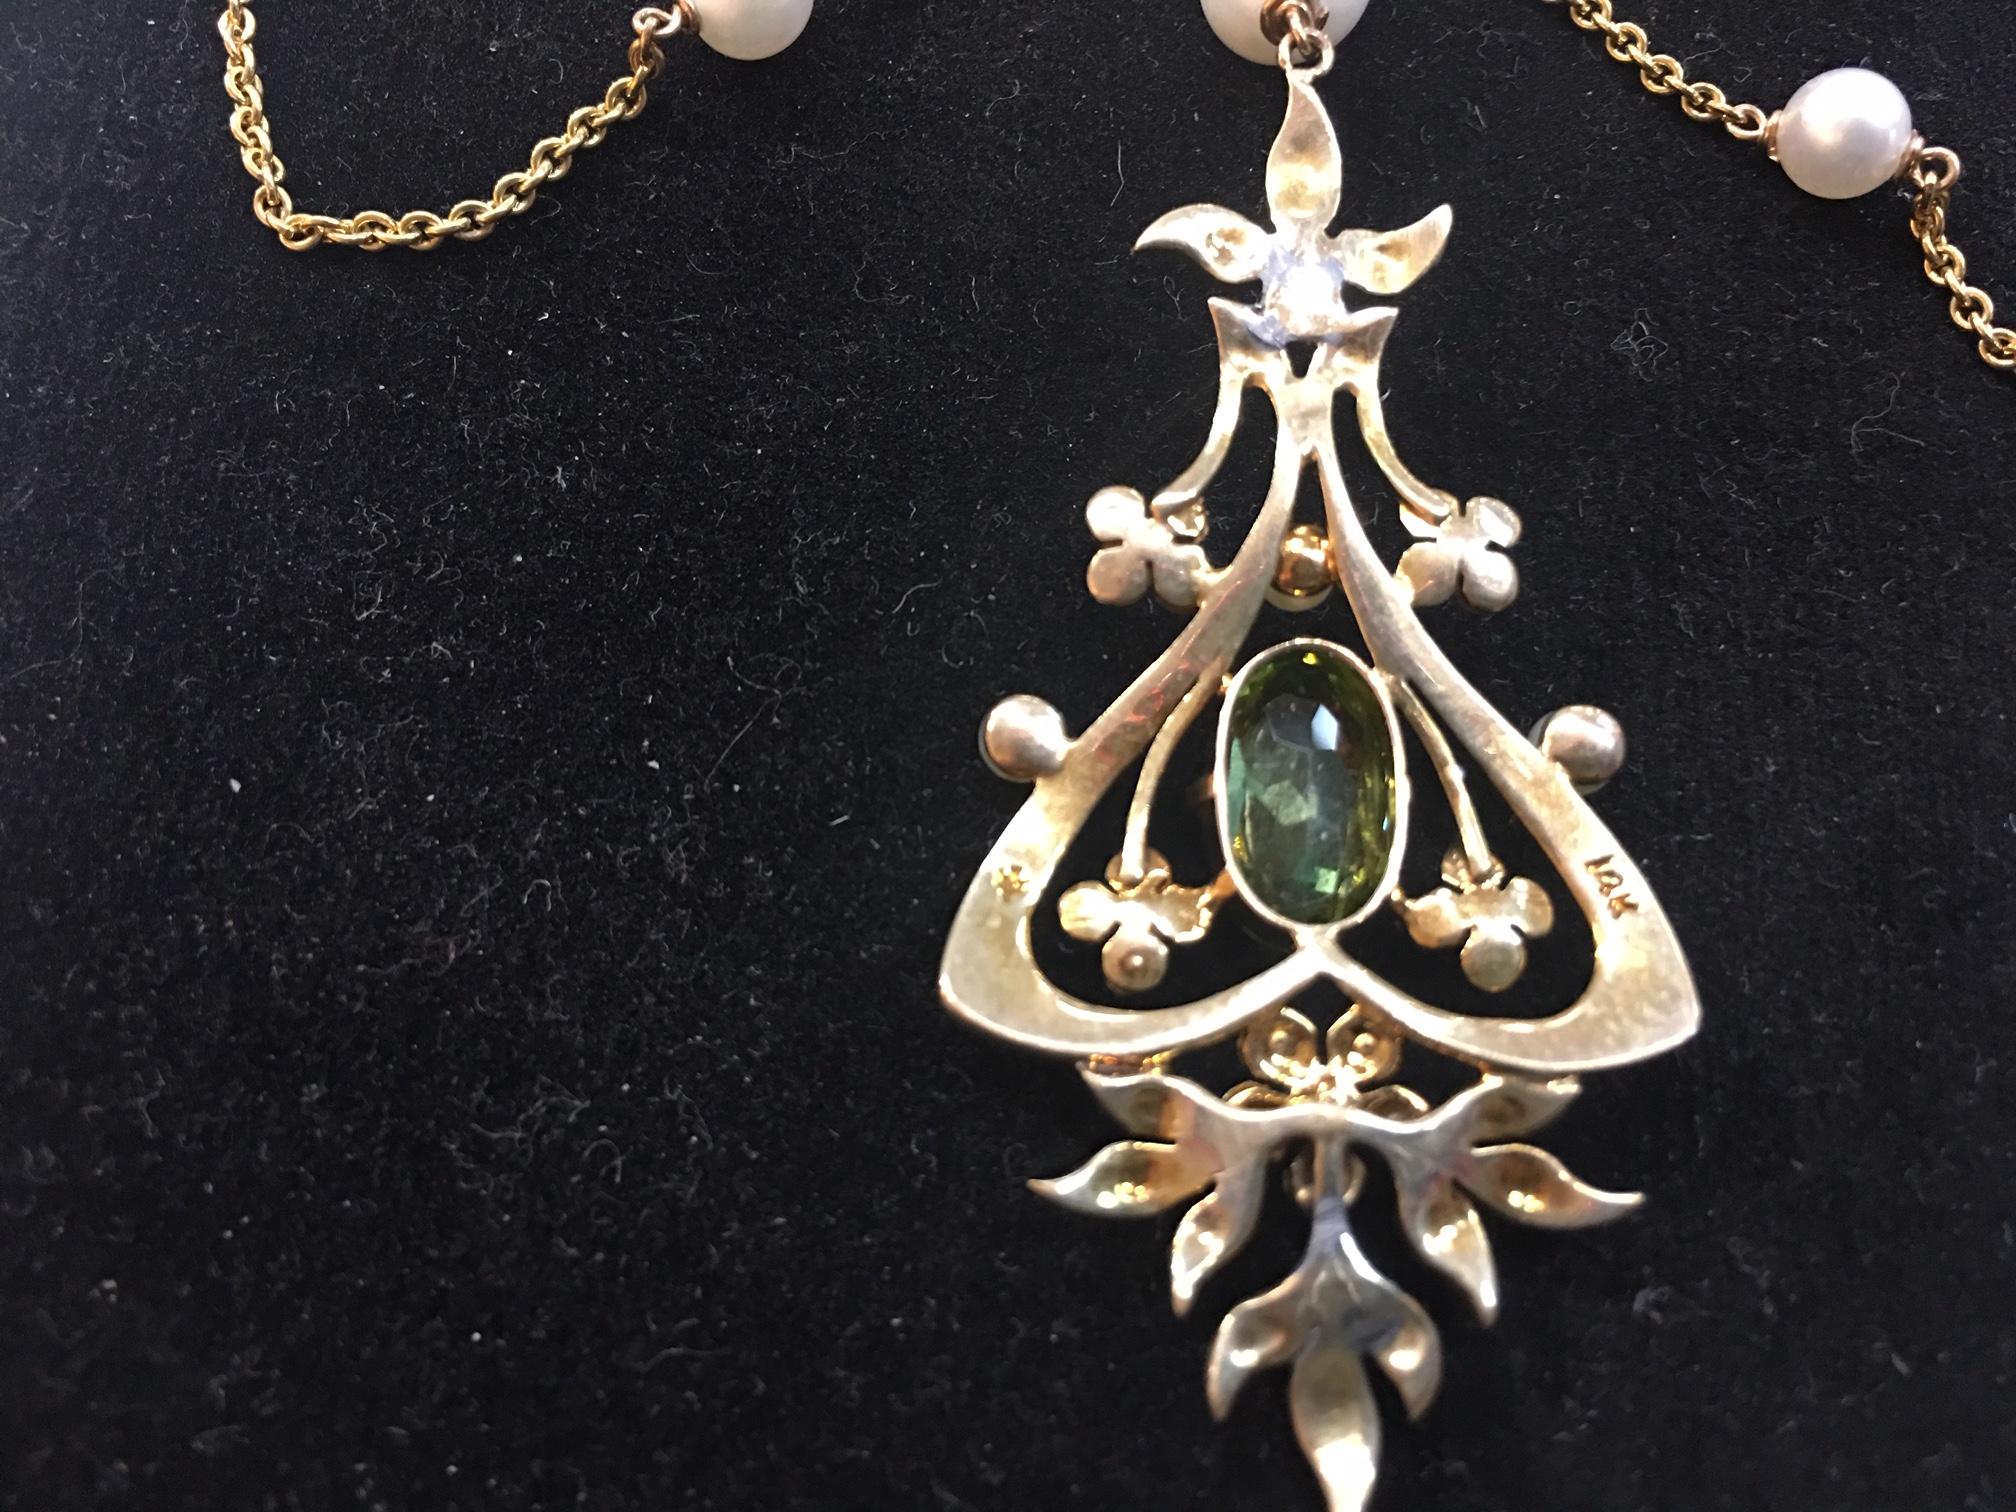 Exquisite Edwardian Swag Necklace, beautifully worked Peridot and pearl medallions, linking gold chain inter-spaced with pearls. Approx. 17.25 inches long with drop measuring an additional 3 inches. Complimentary adjustment of chain length 